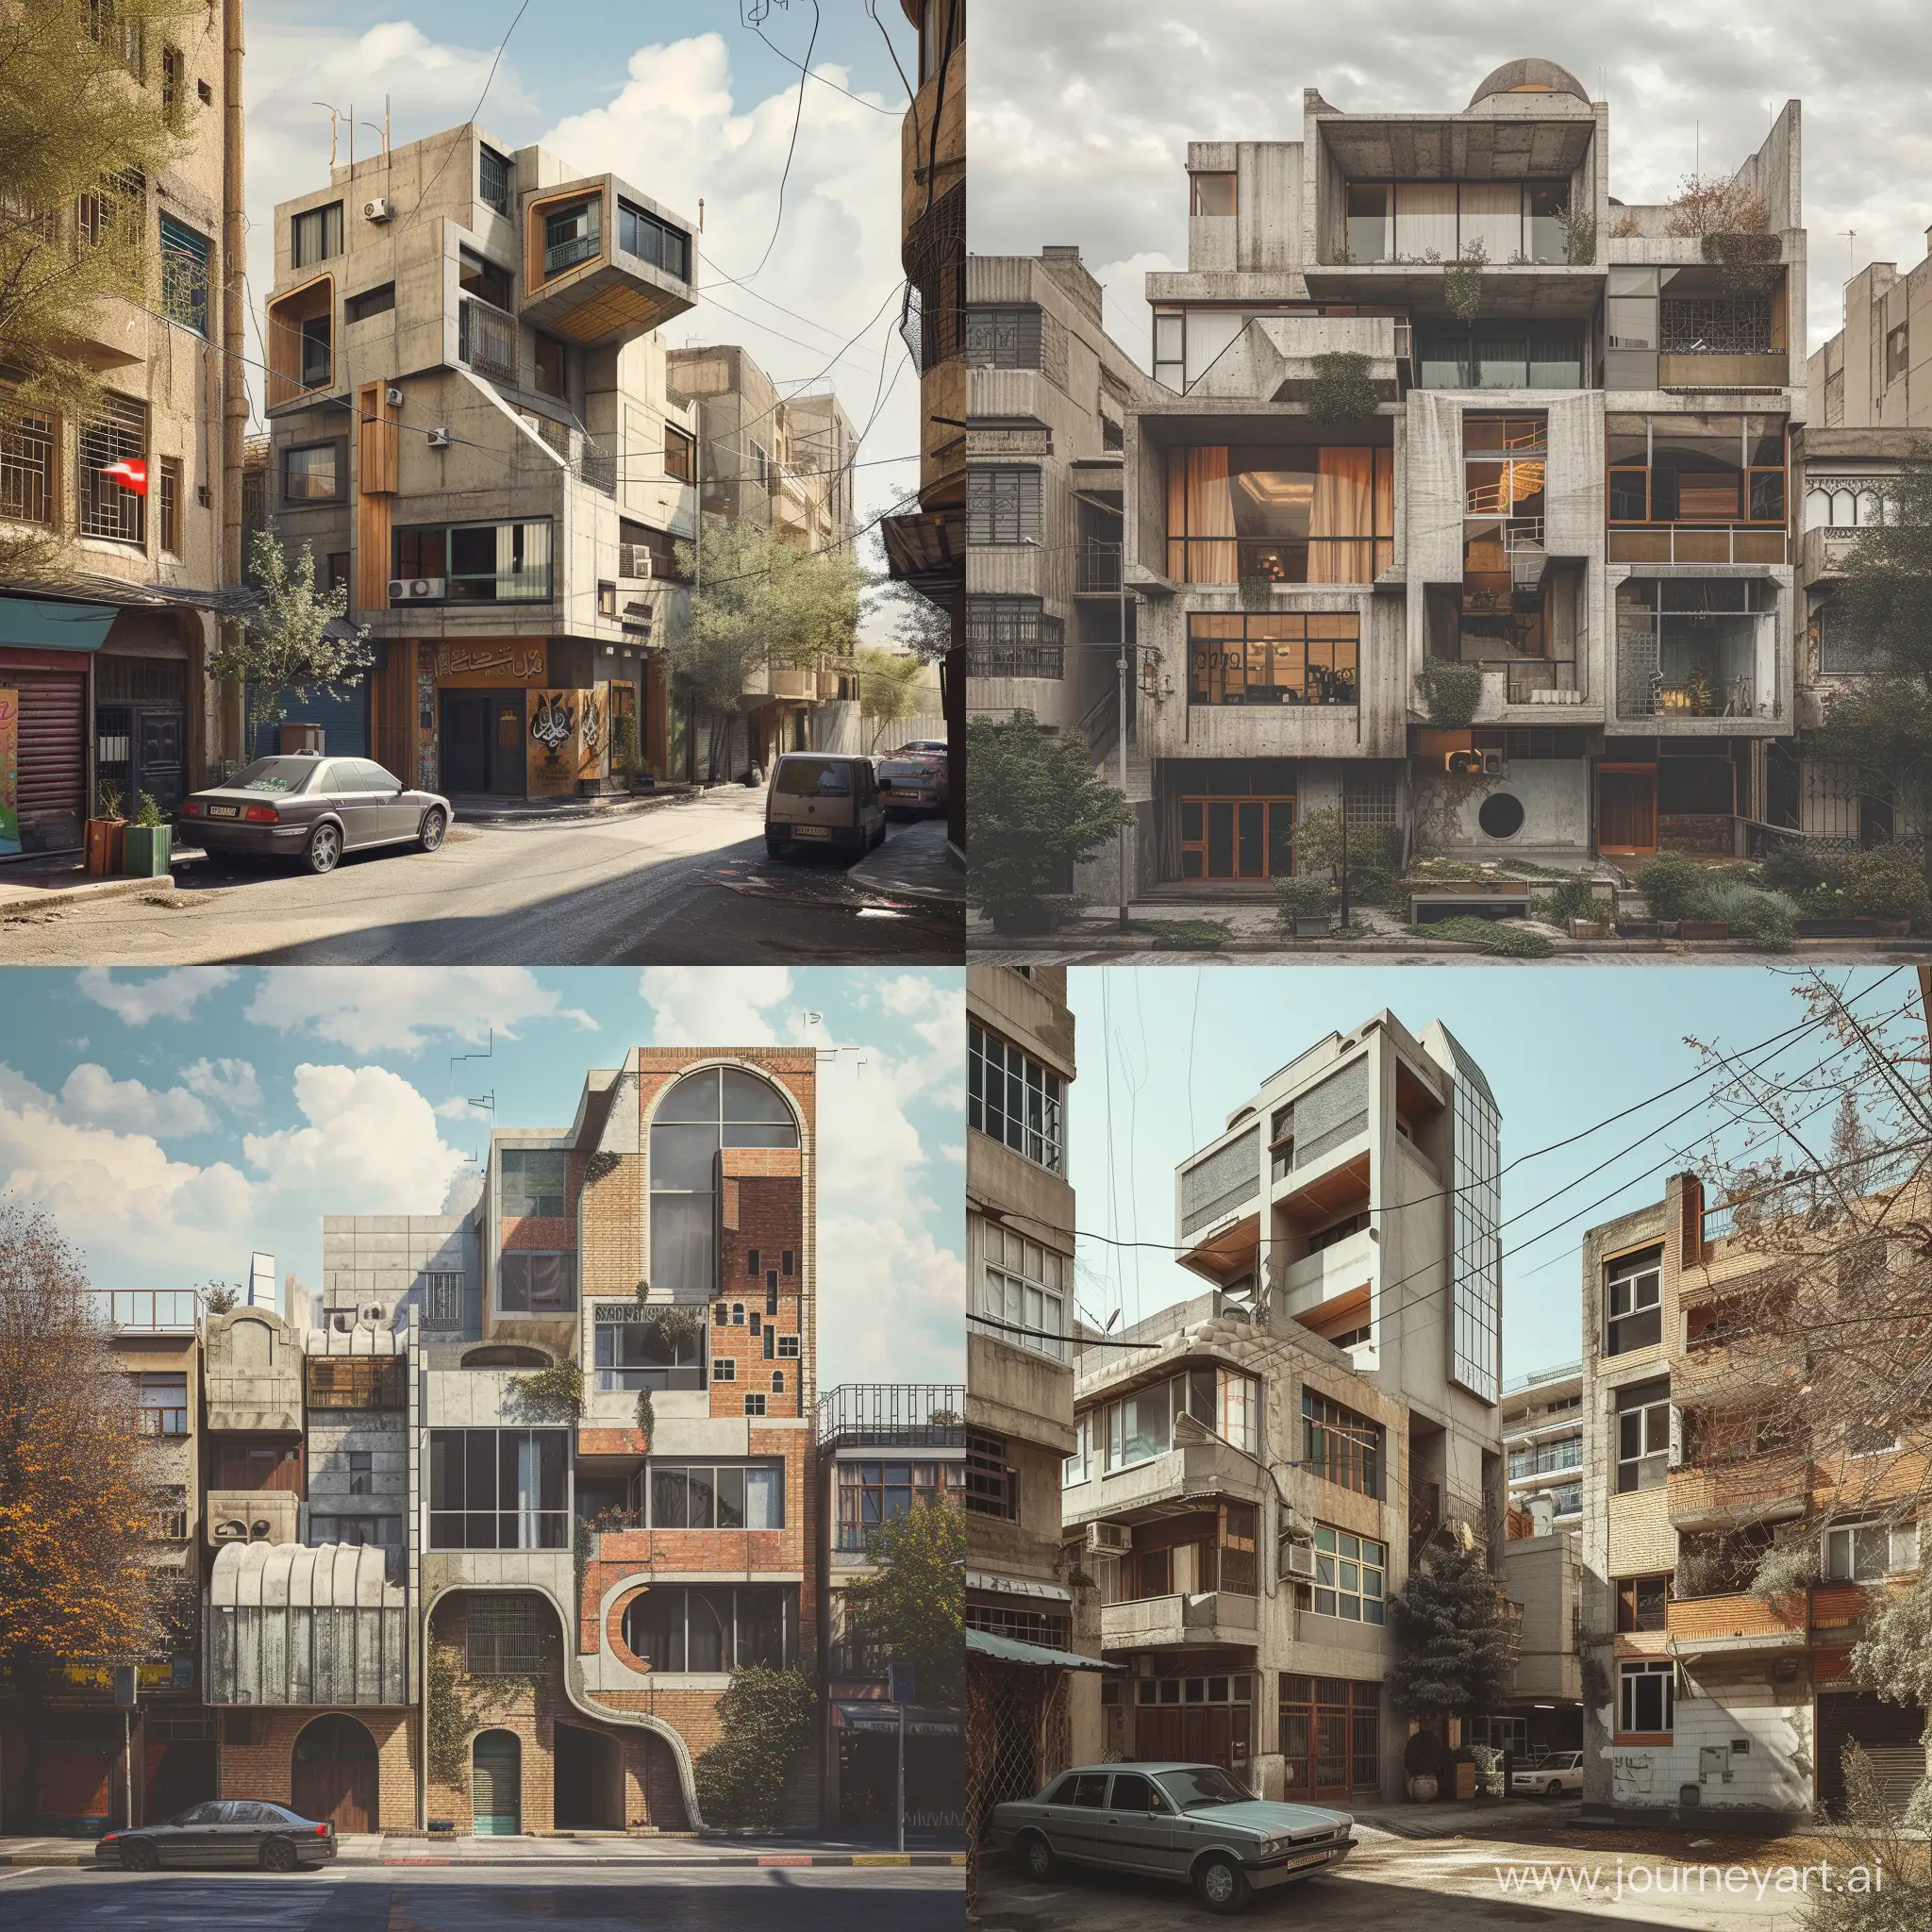 A collage architecture in the urban space of Tehran. Changes should not be exaggerated. A collage-like architecture can be seen in the buildings. Collage can be an indoctrination of futuristic architecture and maybe Islamic architecture. The output should be displayed like a realistic photo.